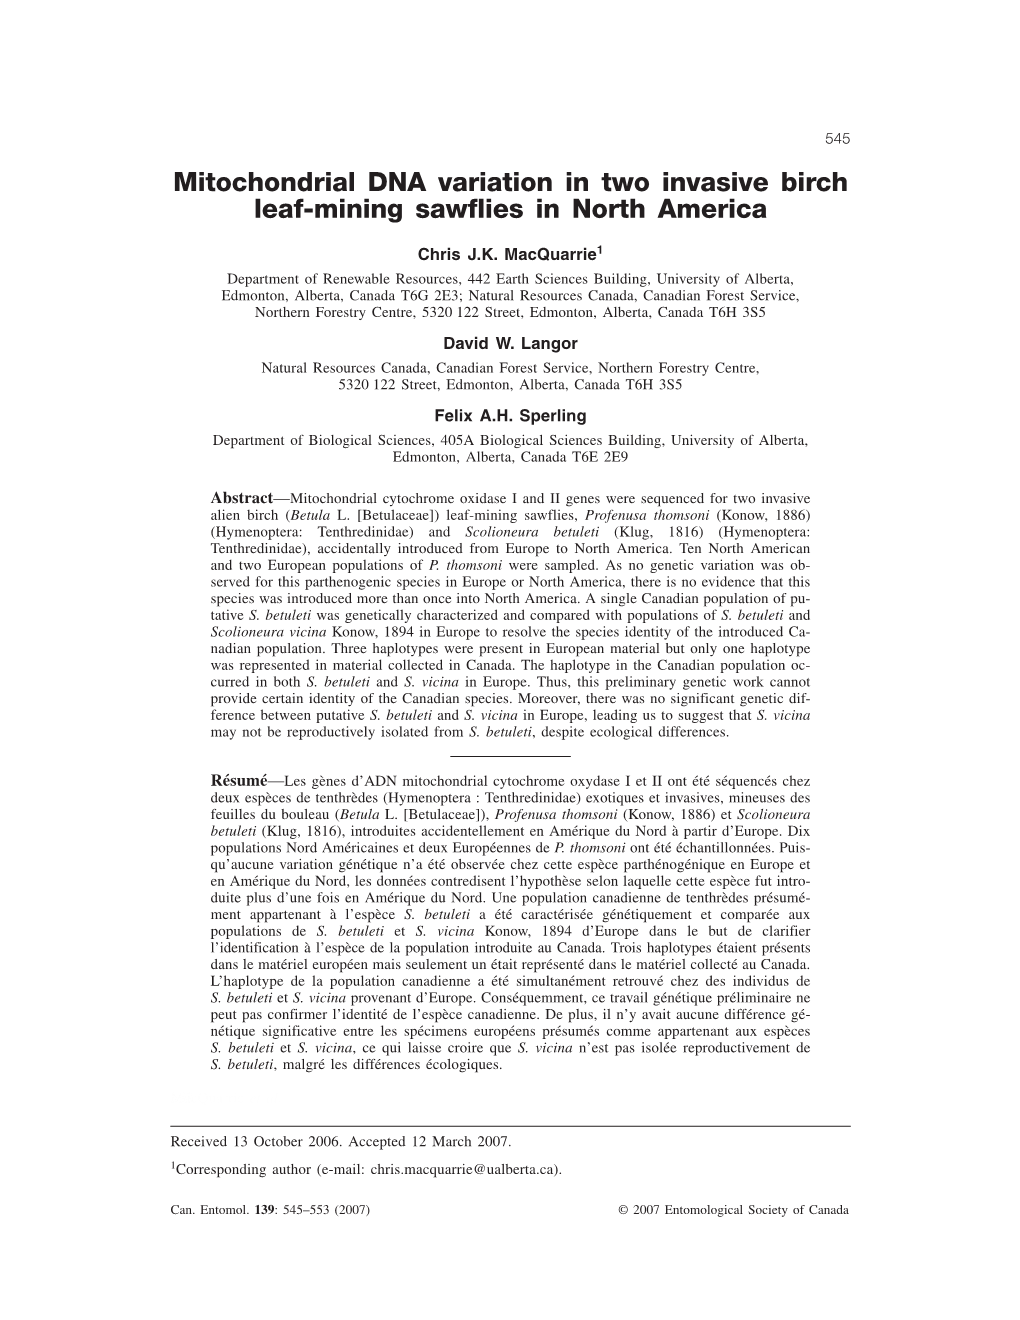 Mitochondrial DNA Variation in Two Invasive Birch Leaf-Mining Sawflies in North America